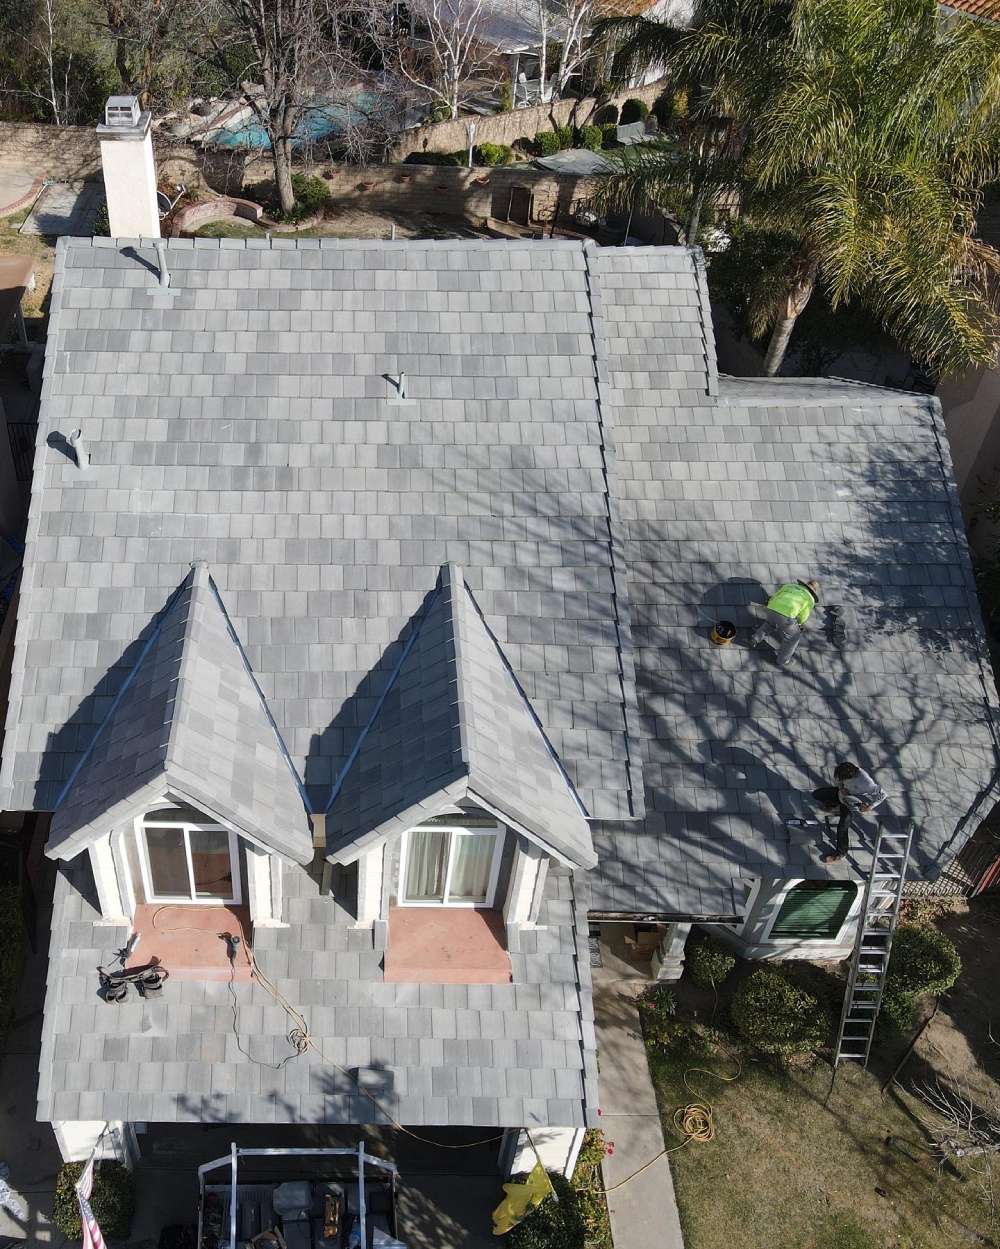 Graziano Roofing